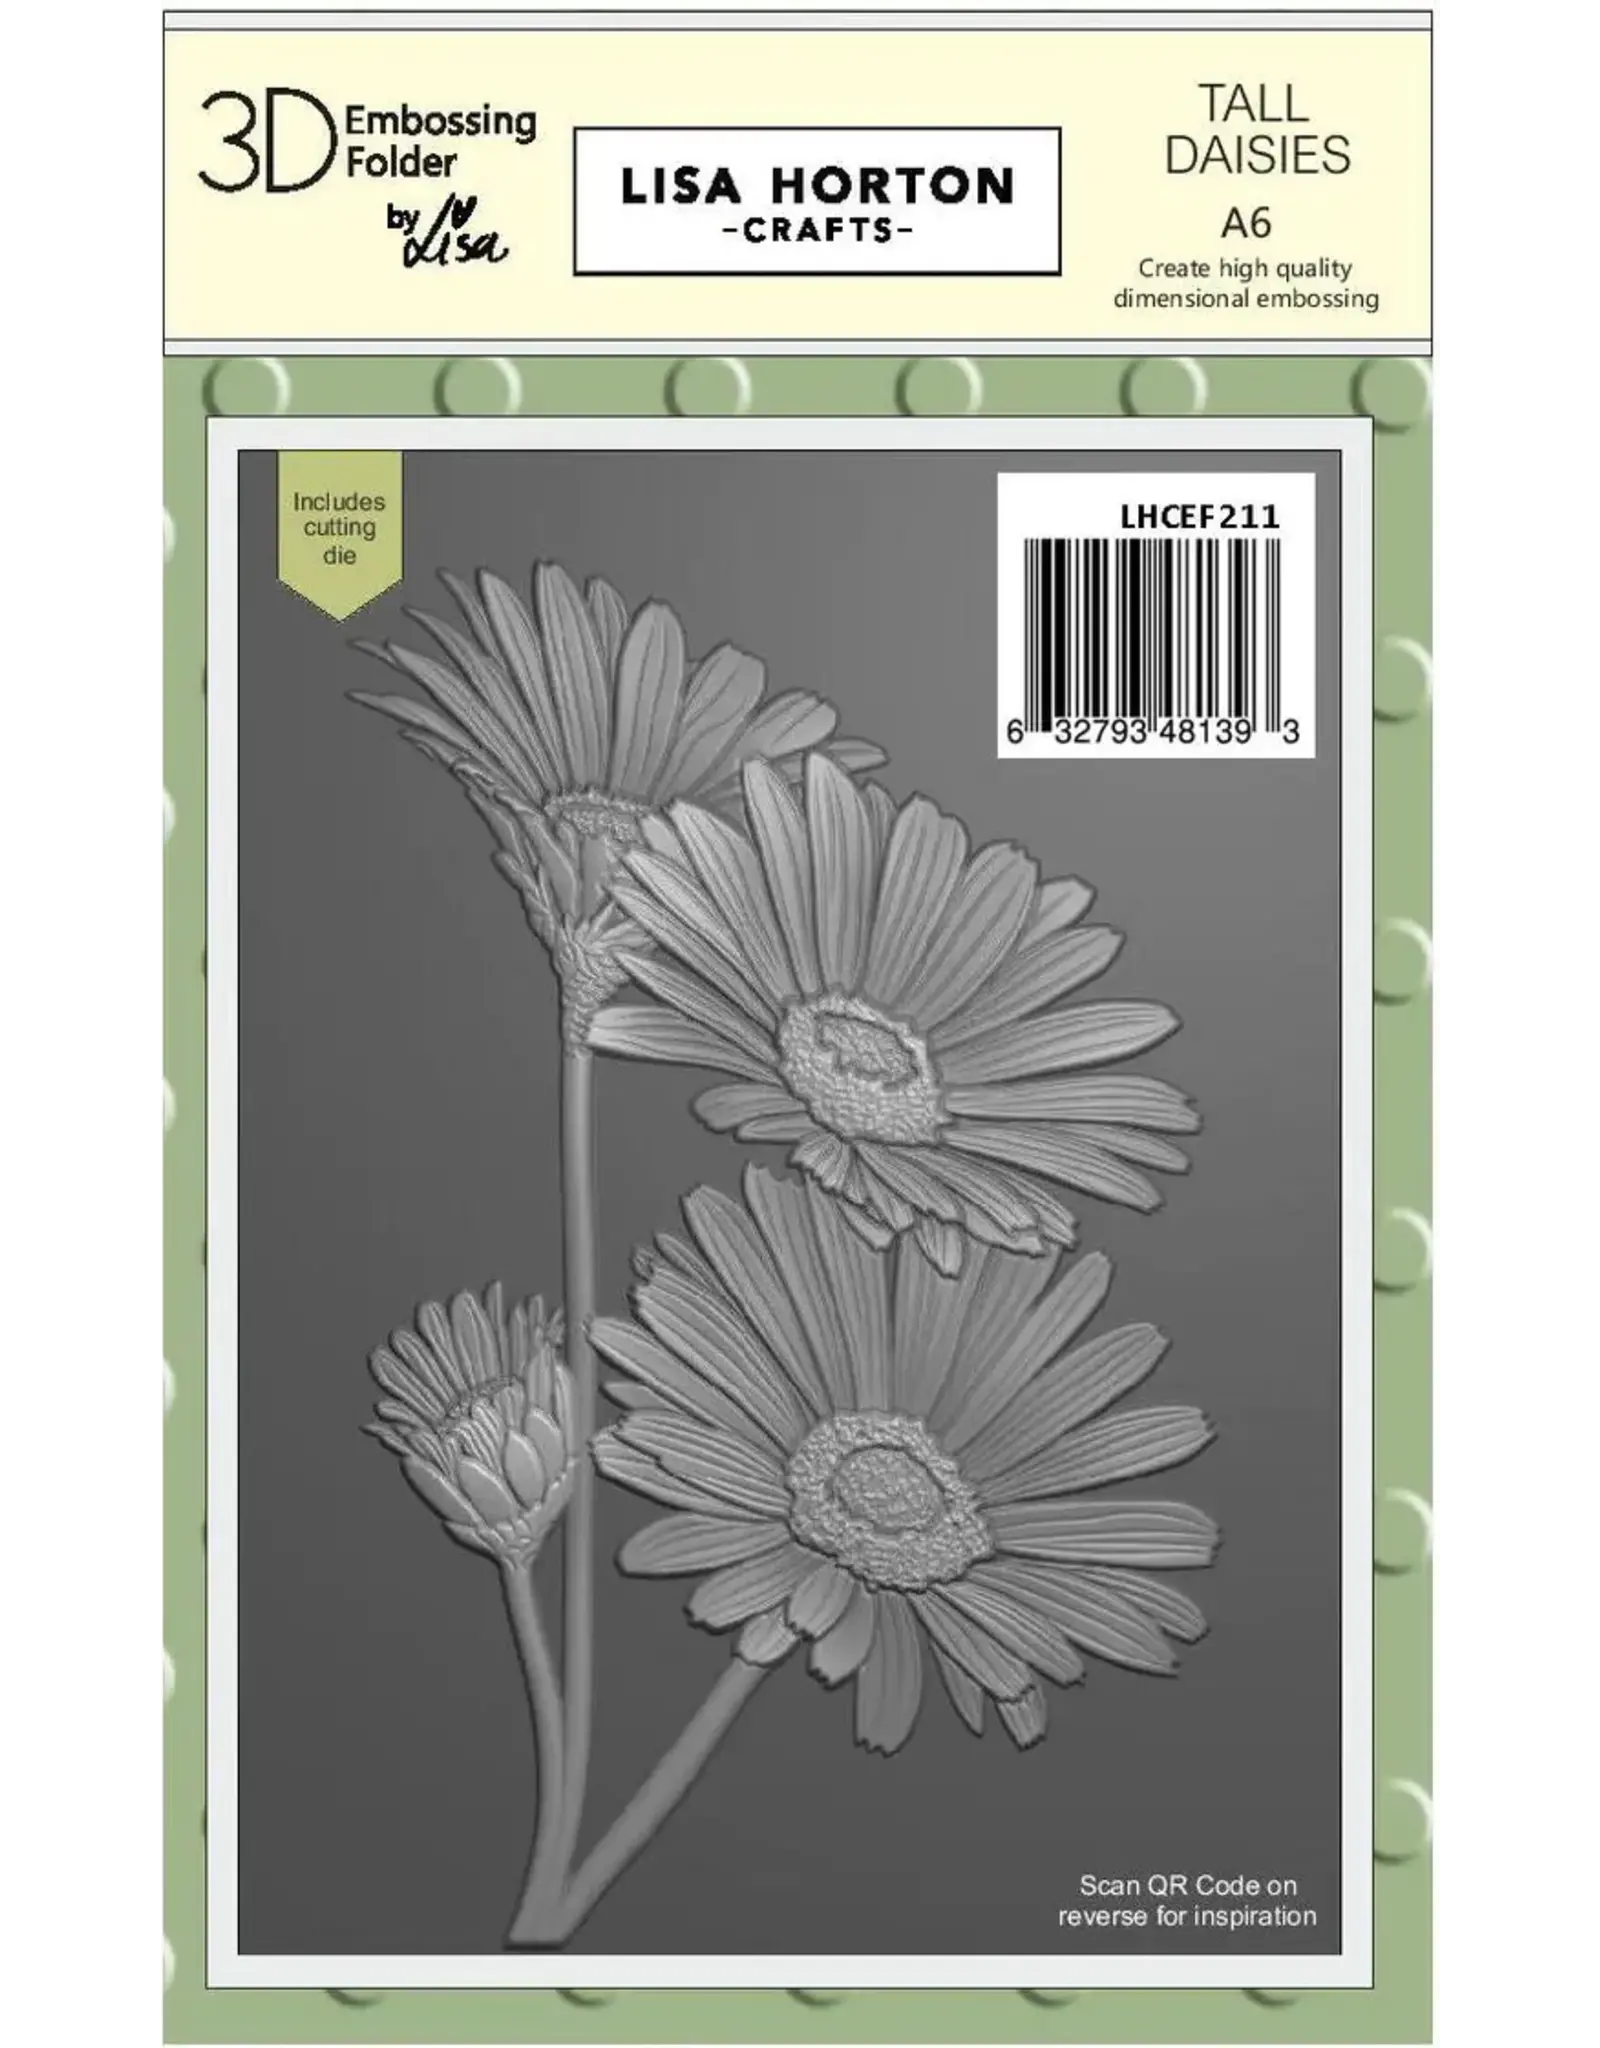 LISA HORTON CRAFTS LISA HORTON CRAFTS TALL DAISIES A6 3D EMBOSSING FOLDER AND DIE